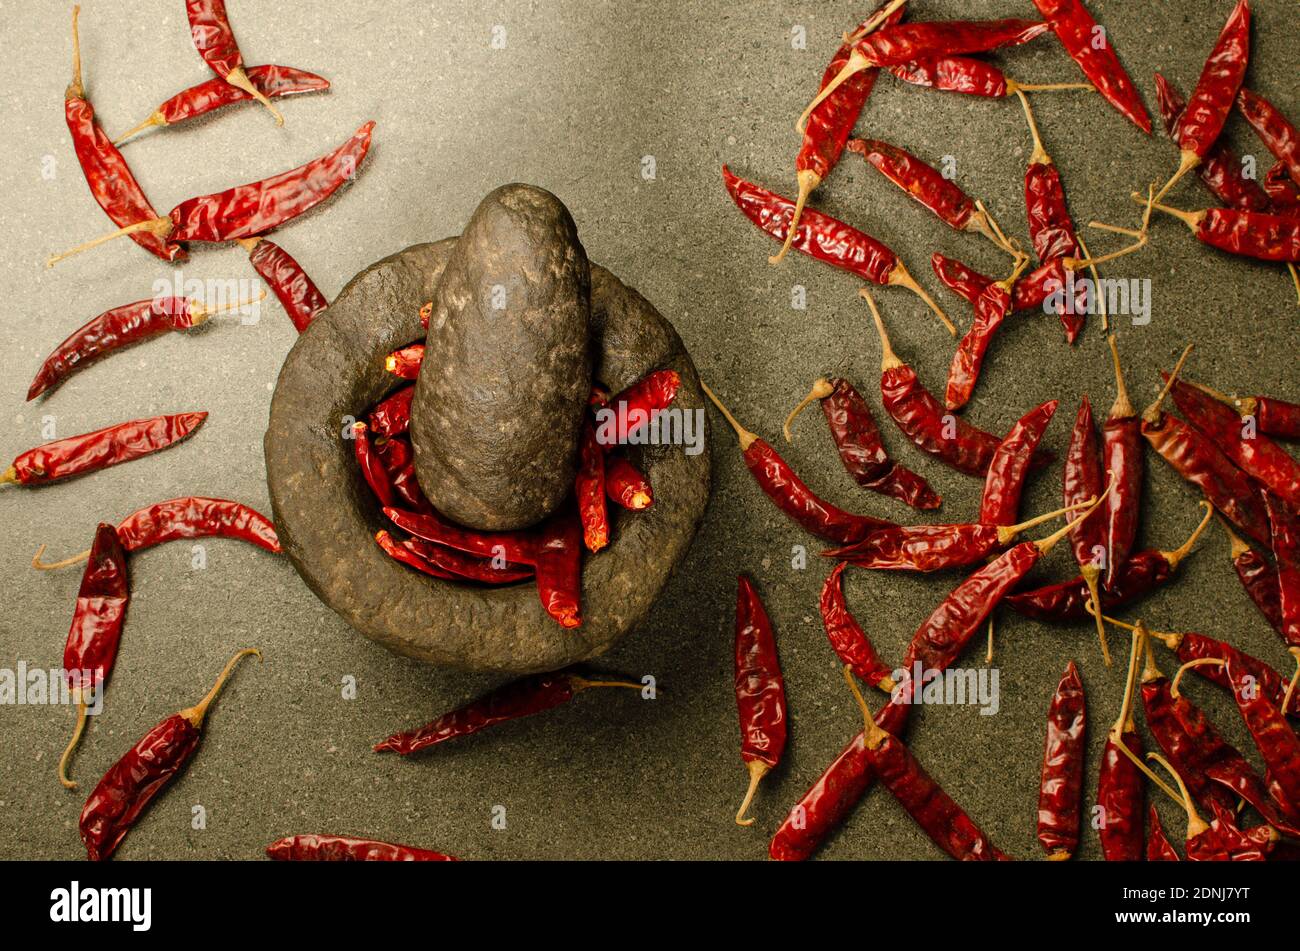 Indian stone Mortar and Pestle Set with Dried Red Chili in Mortar.Dried Red Chilis spread all over. Studio Shot Stock Photo